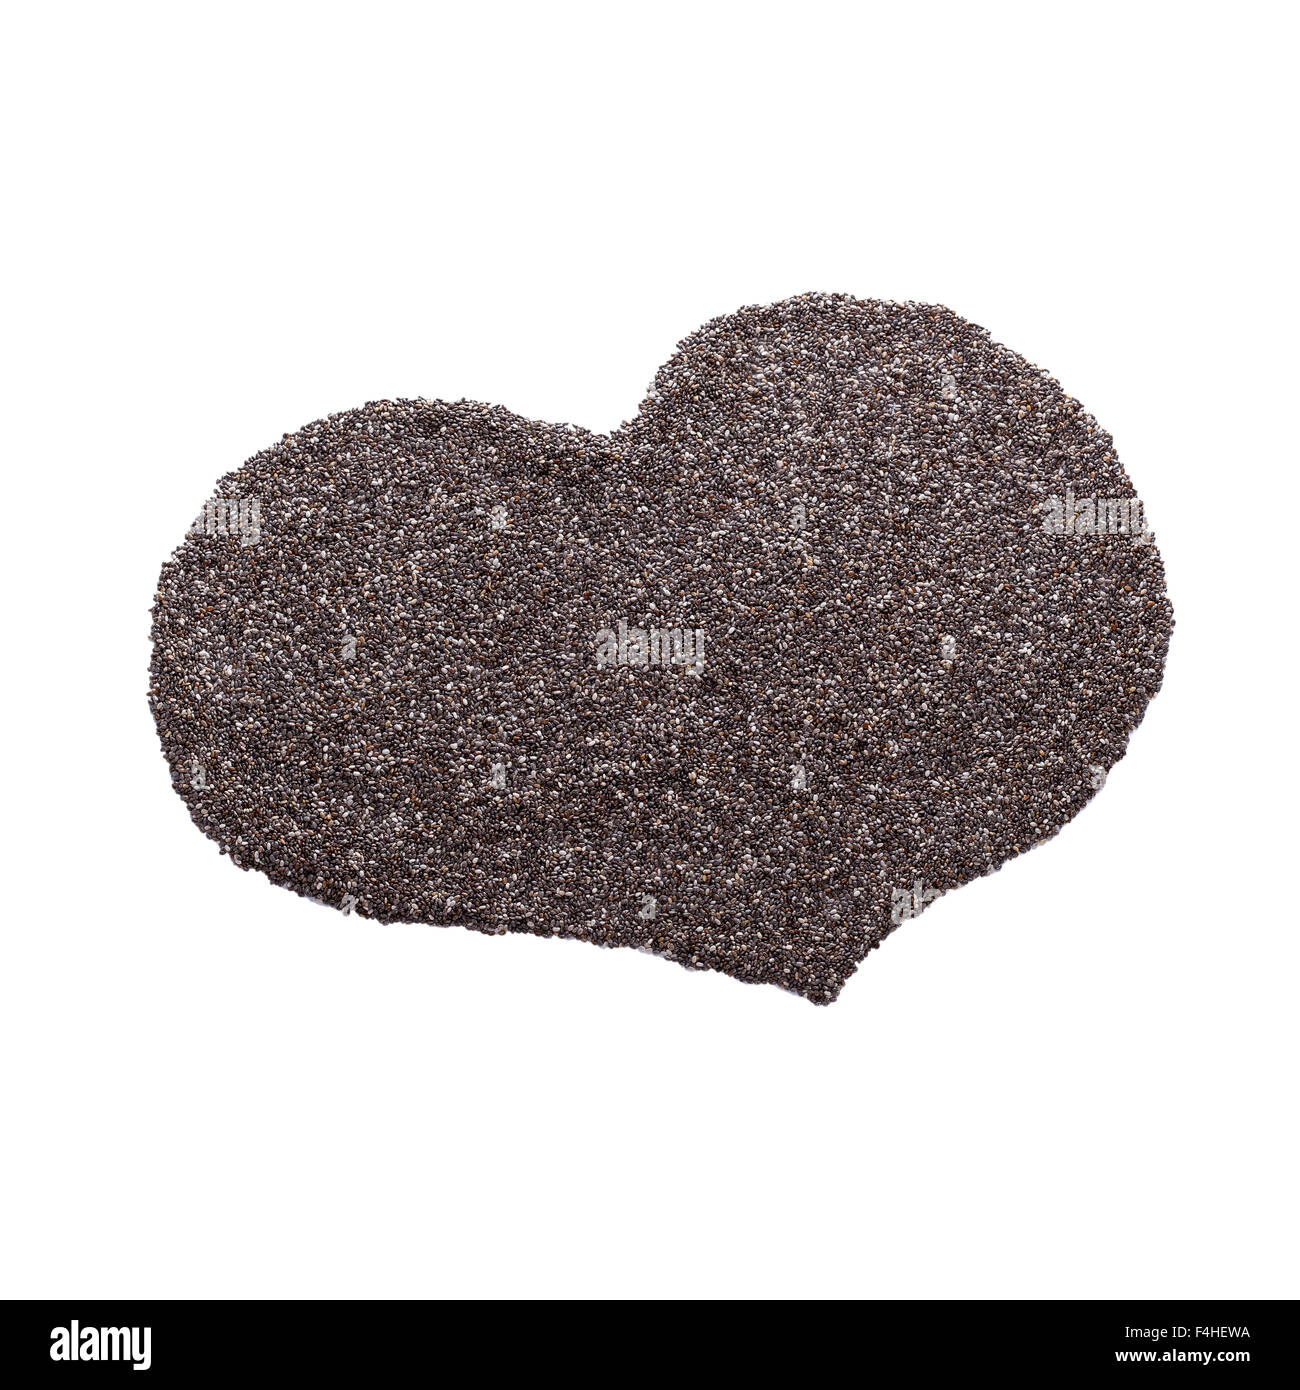 Heart shape symbol made from dry black chia seeds on white Stock Photo